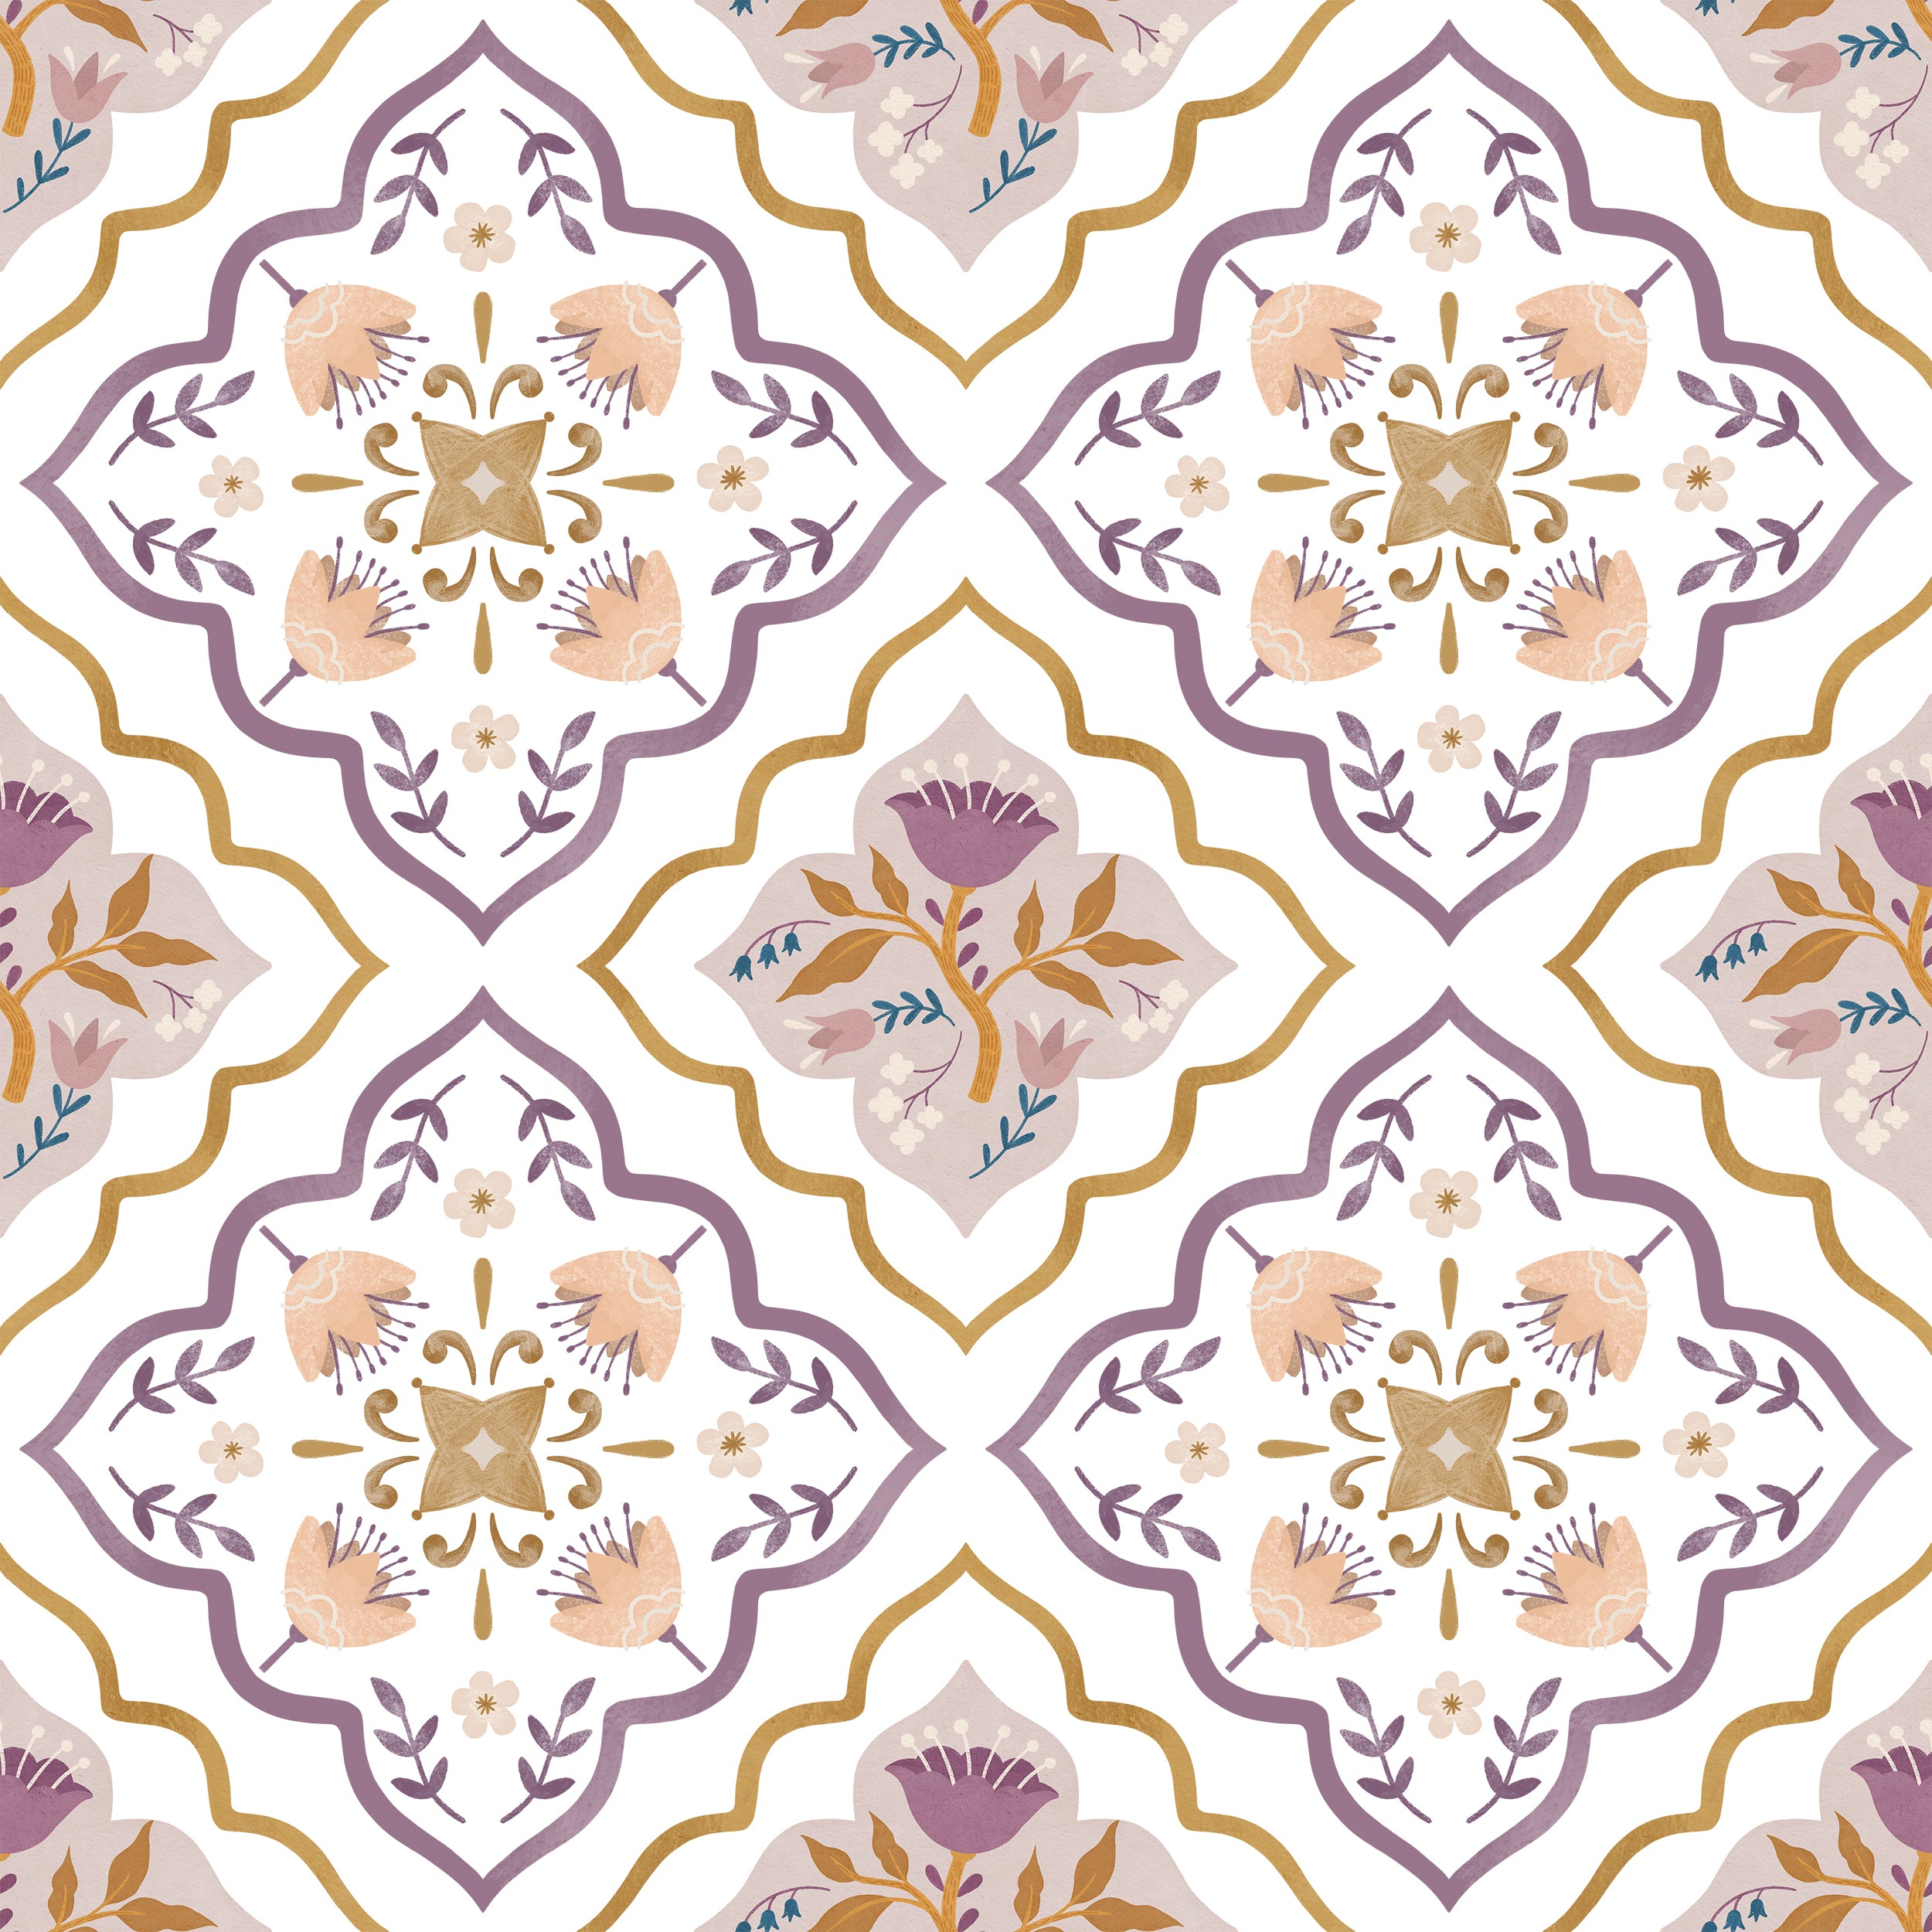 Close-up of Moroccan Floral Tile Wallpaper displaying an intricate design of floral and geometric elements in purple, gold, and beige